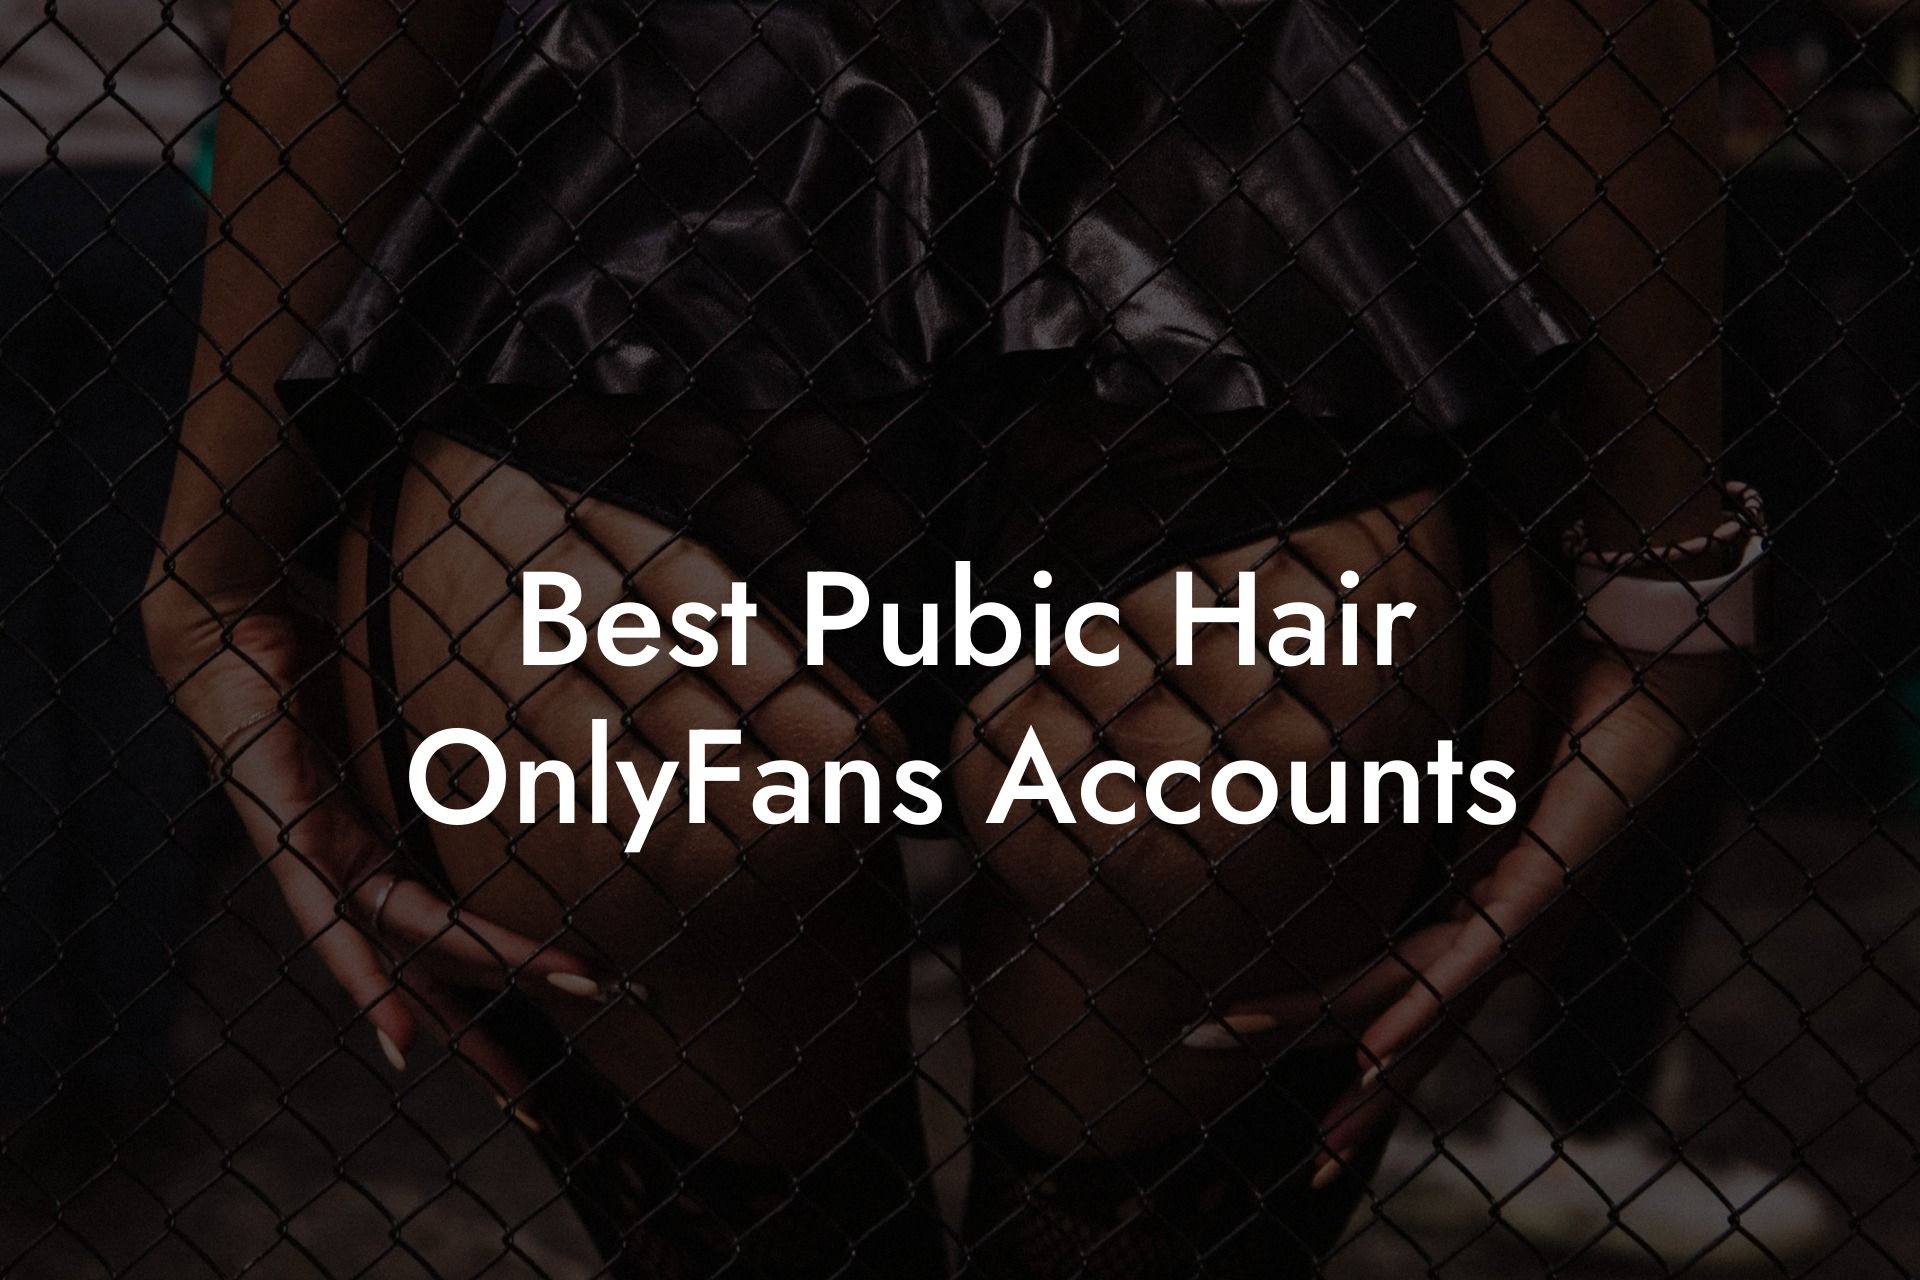 Best Pubic Hair OnlyFans Accounts